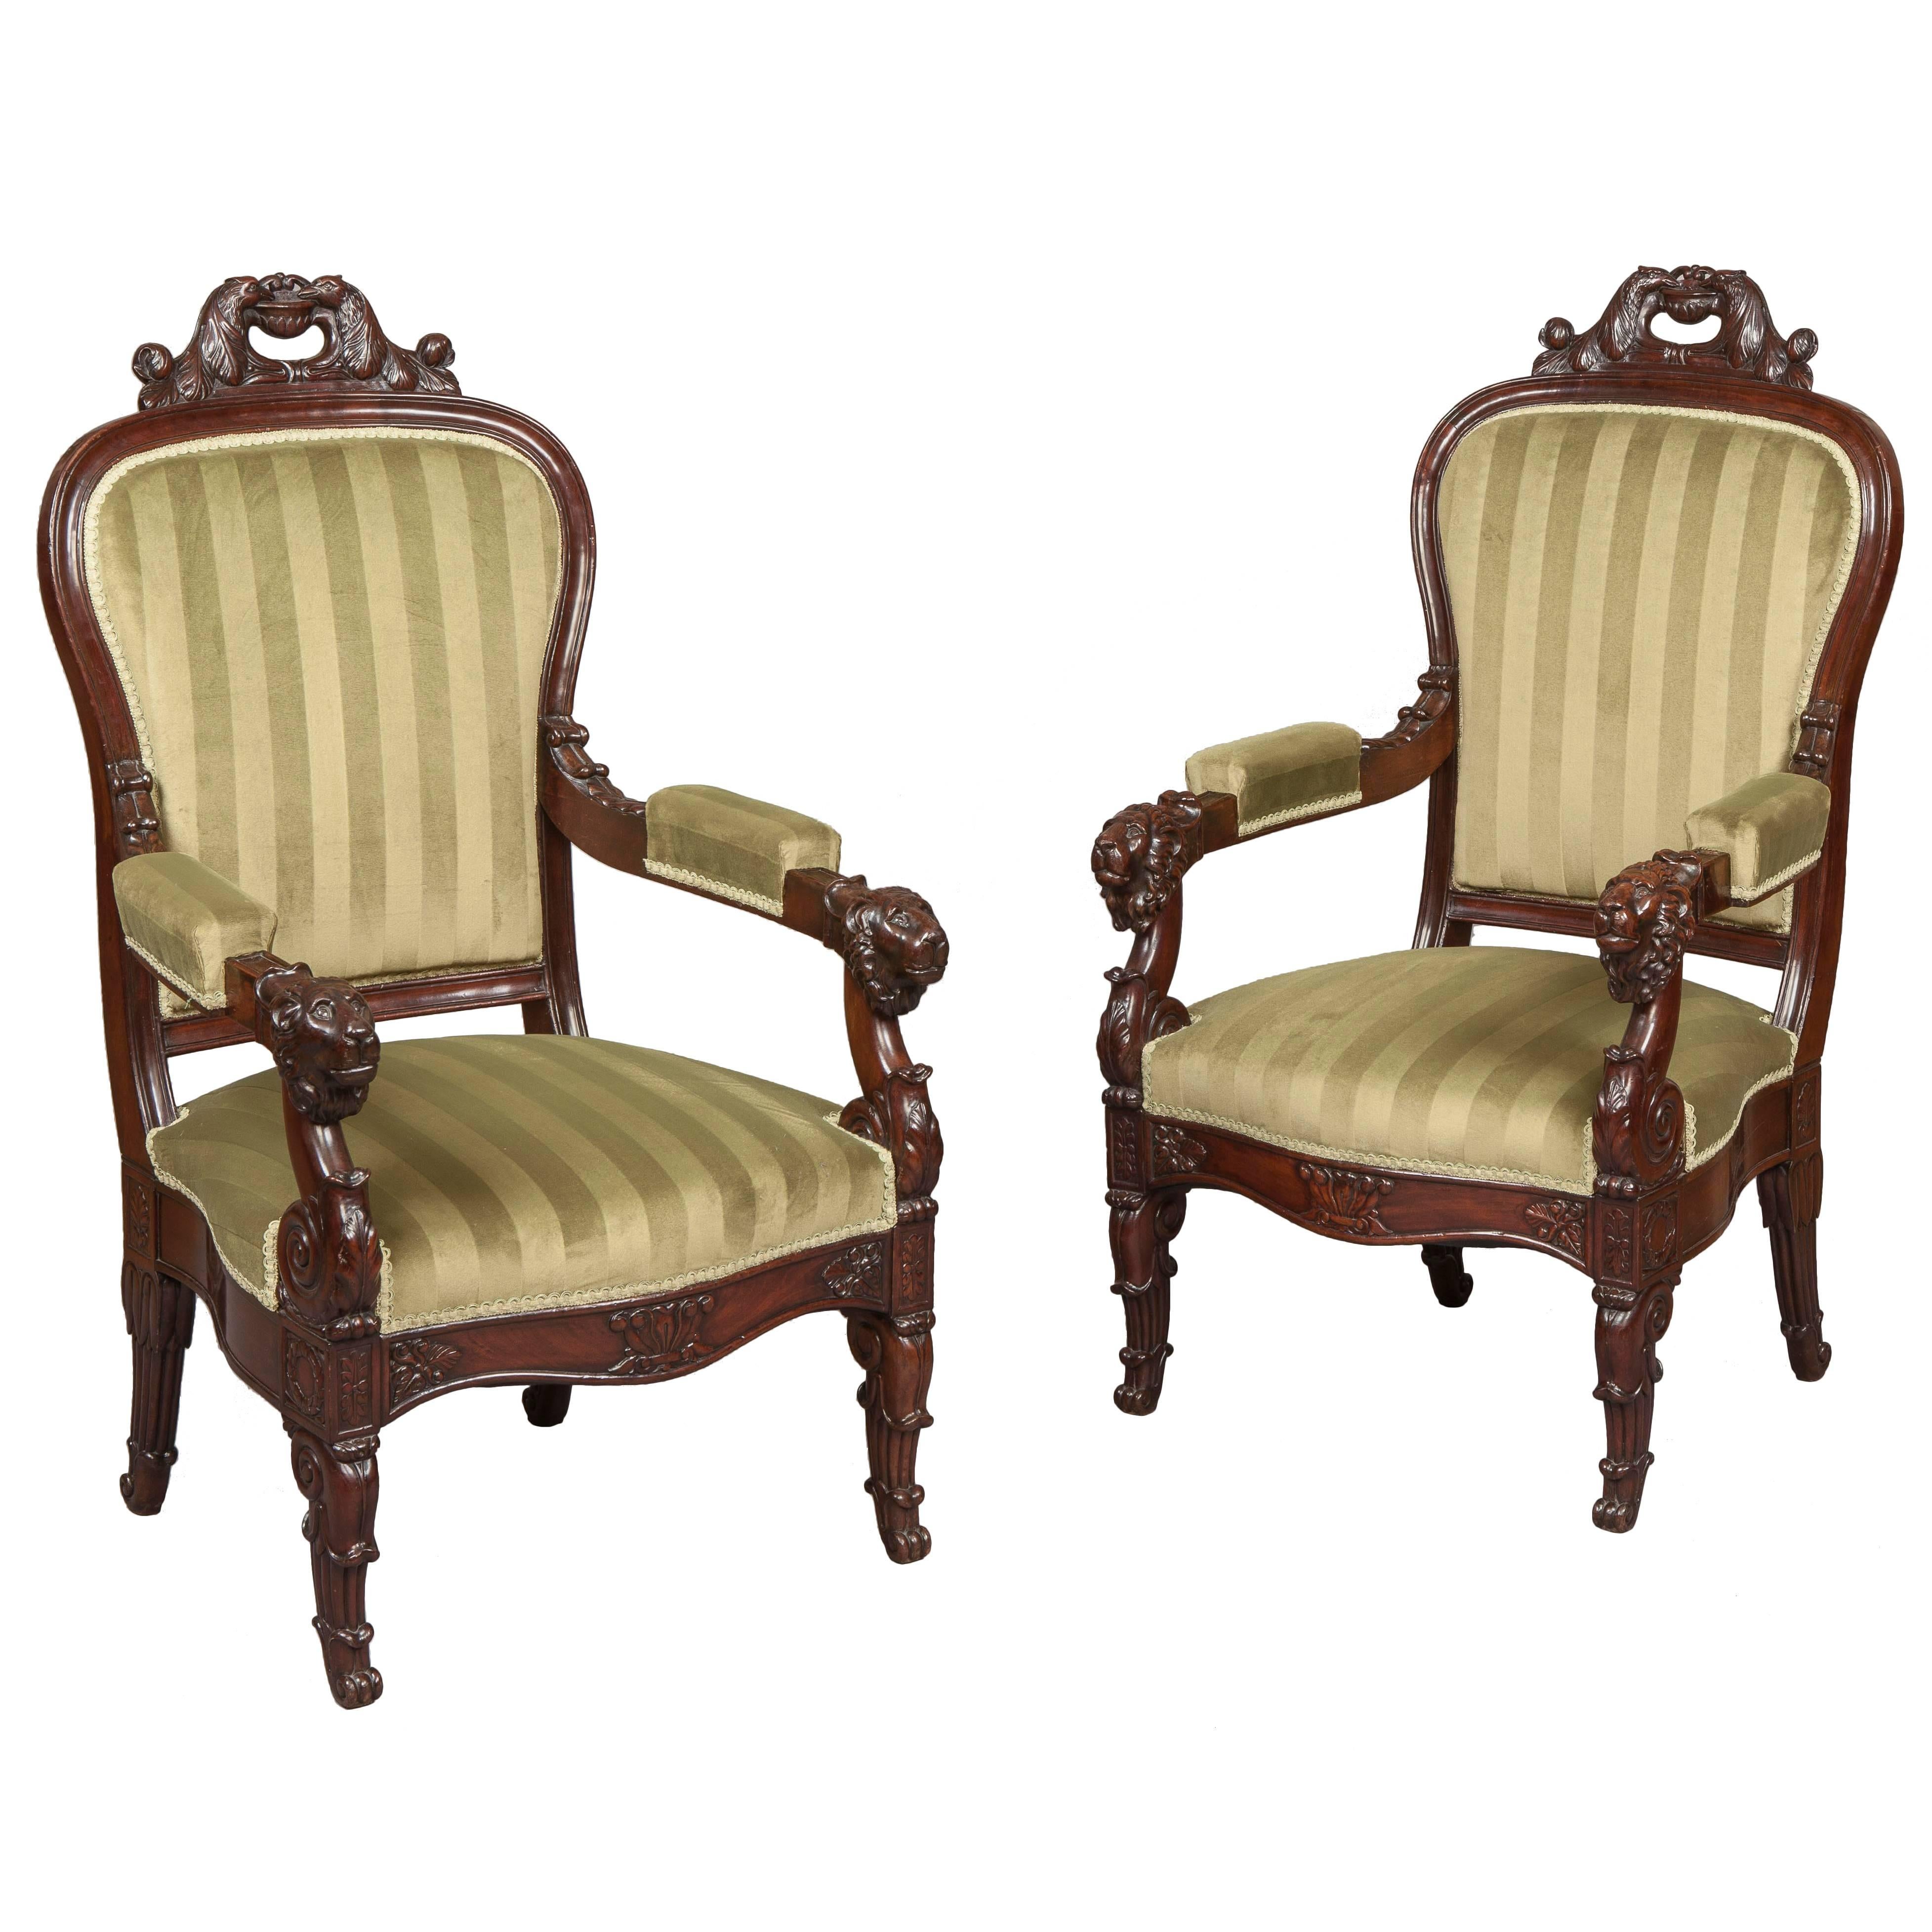 Pair of French Carved Mahogany Armchairs, 19th Century